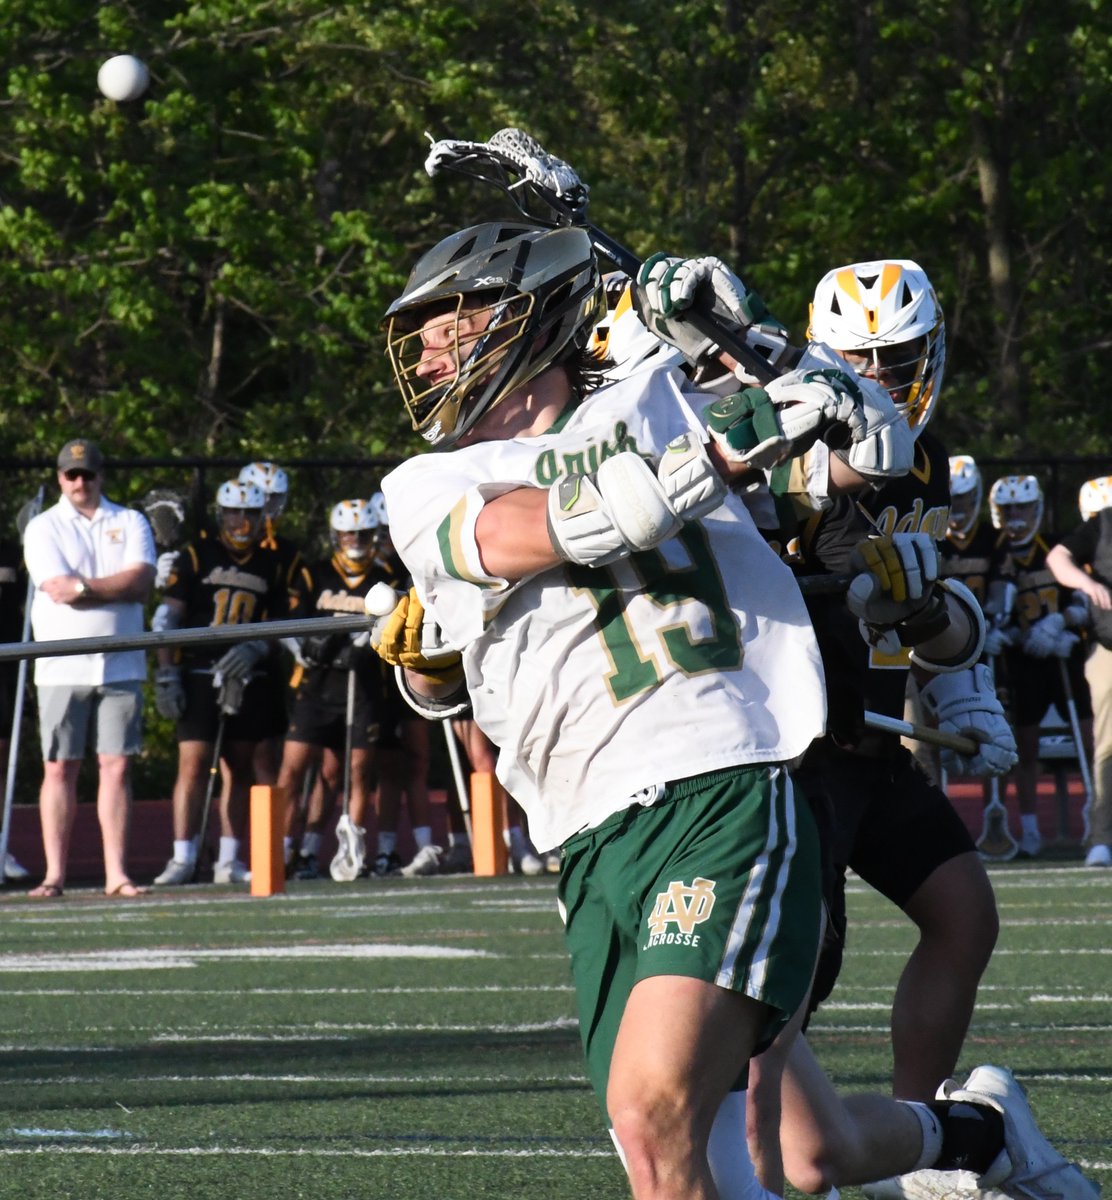 Finally captured a behind-the-back shot in focus. NDP has some players that aren't afraid to take them. @NDP_boys_lax